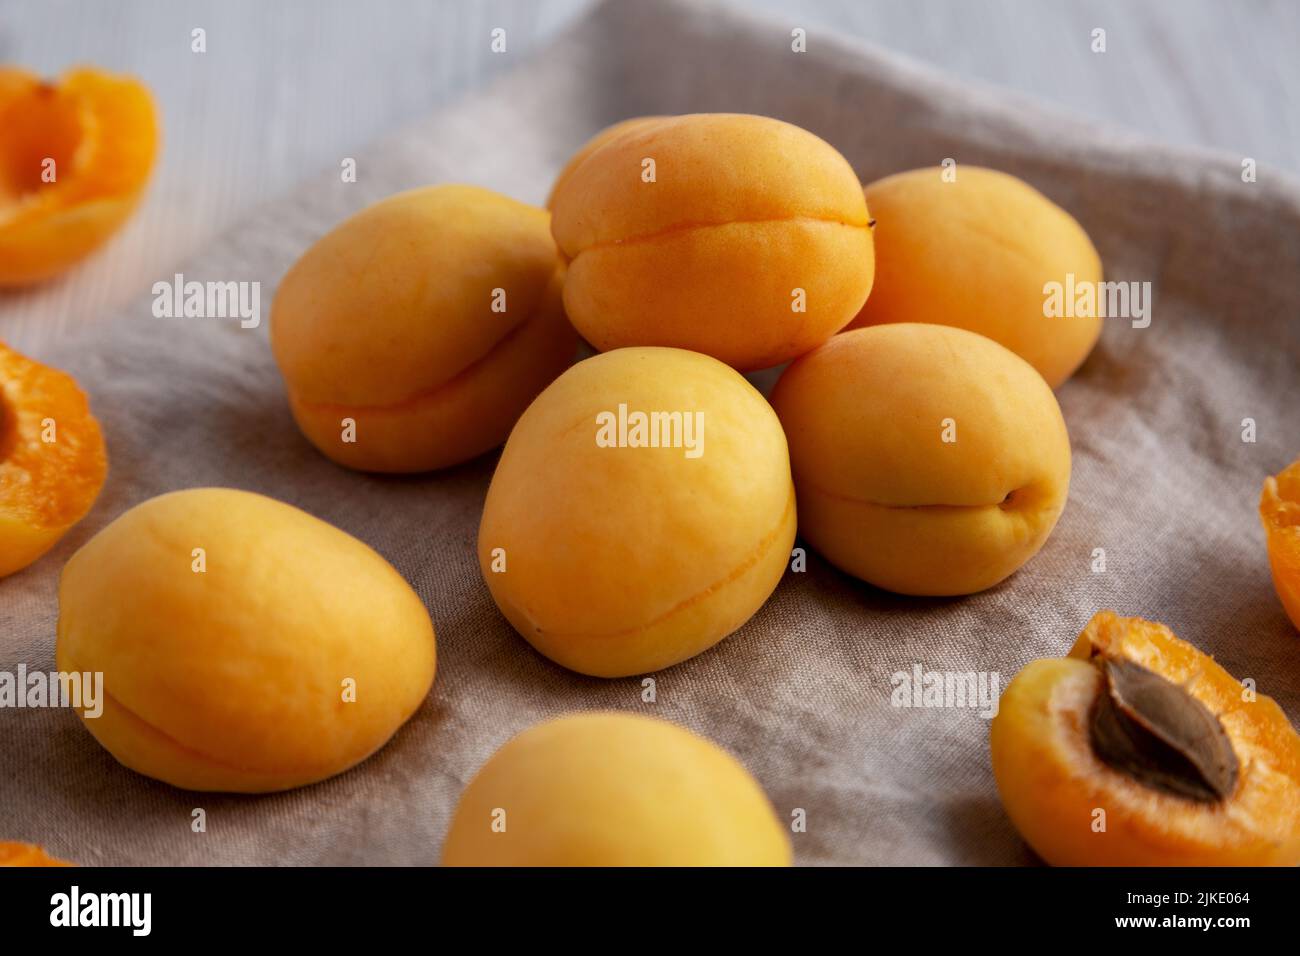 Raw White Apricot Angelcots on a white wooden surface, side view. Stock Photo